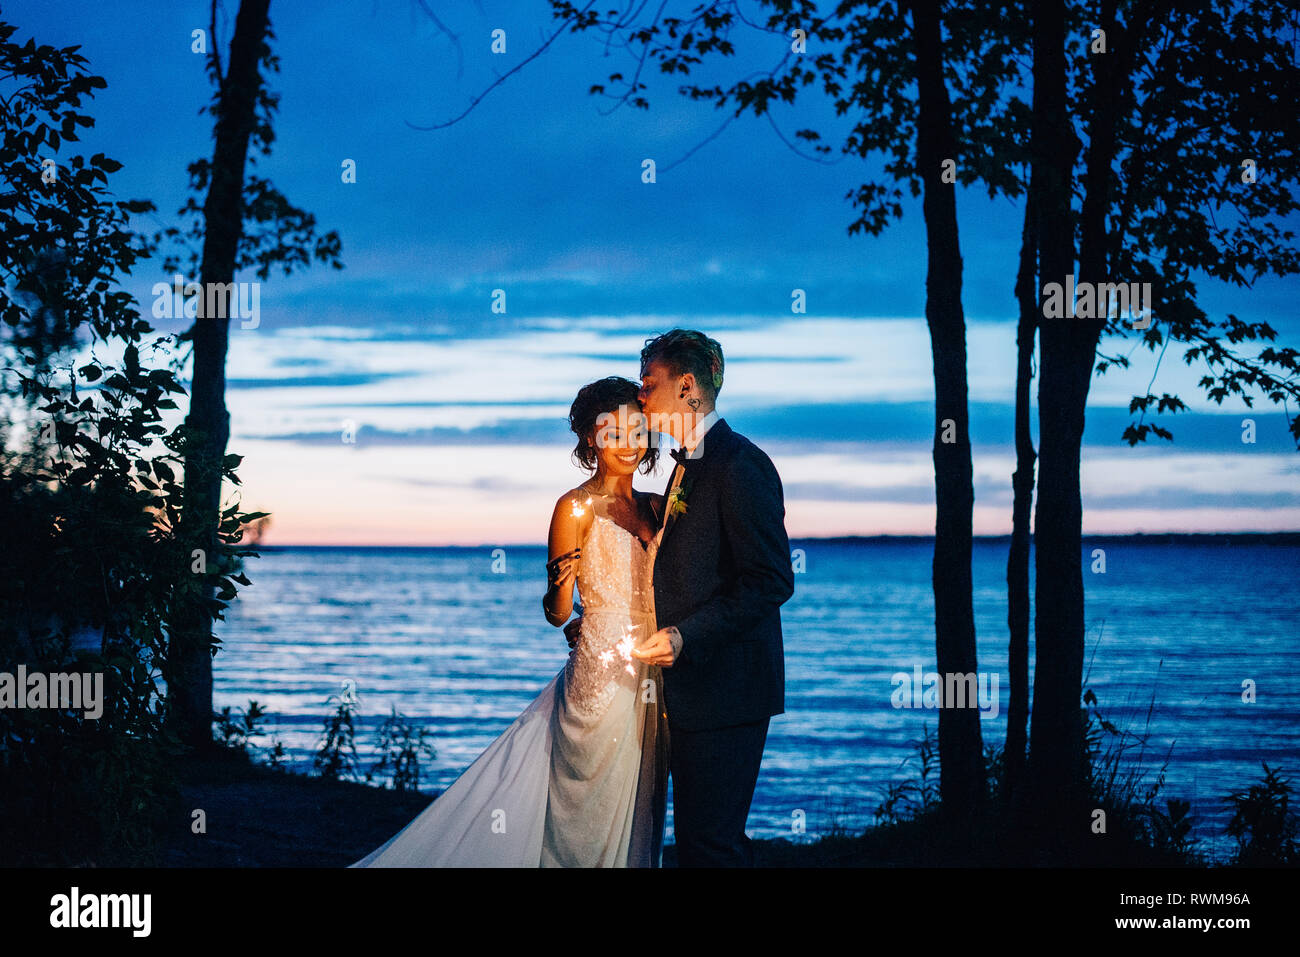 Romantic bride and groom with sparklers by lakeside at dusk, Lake Ontario, Toronto, Canada Stock Photo